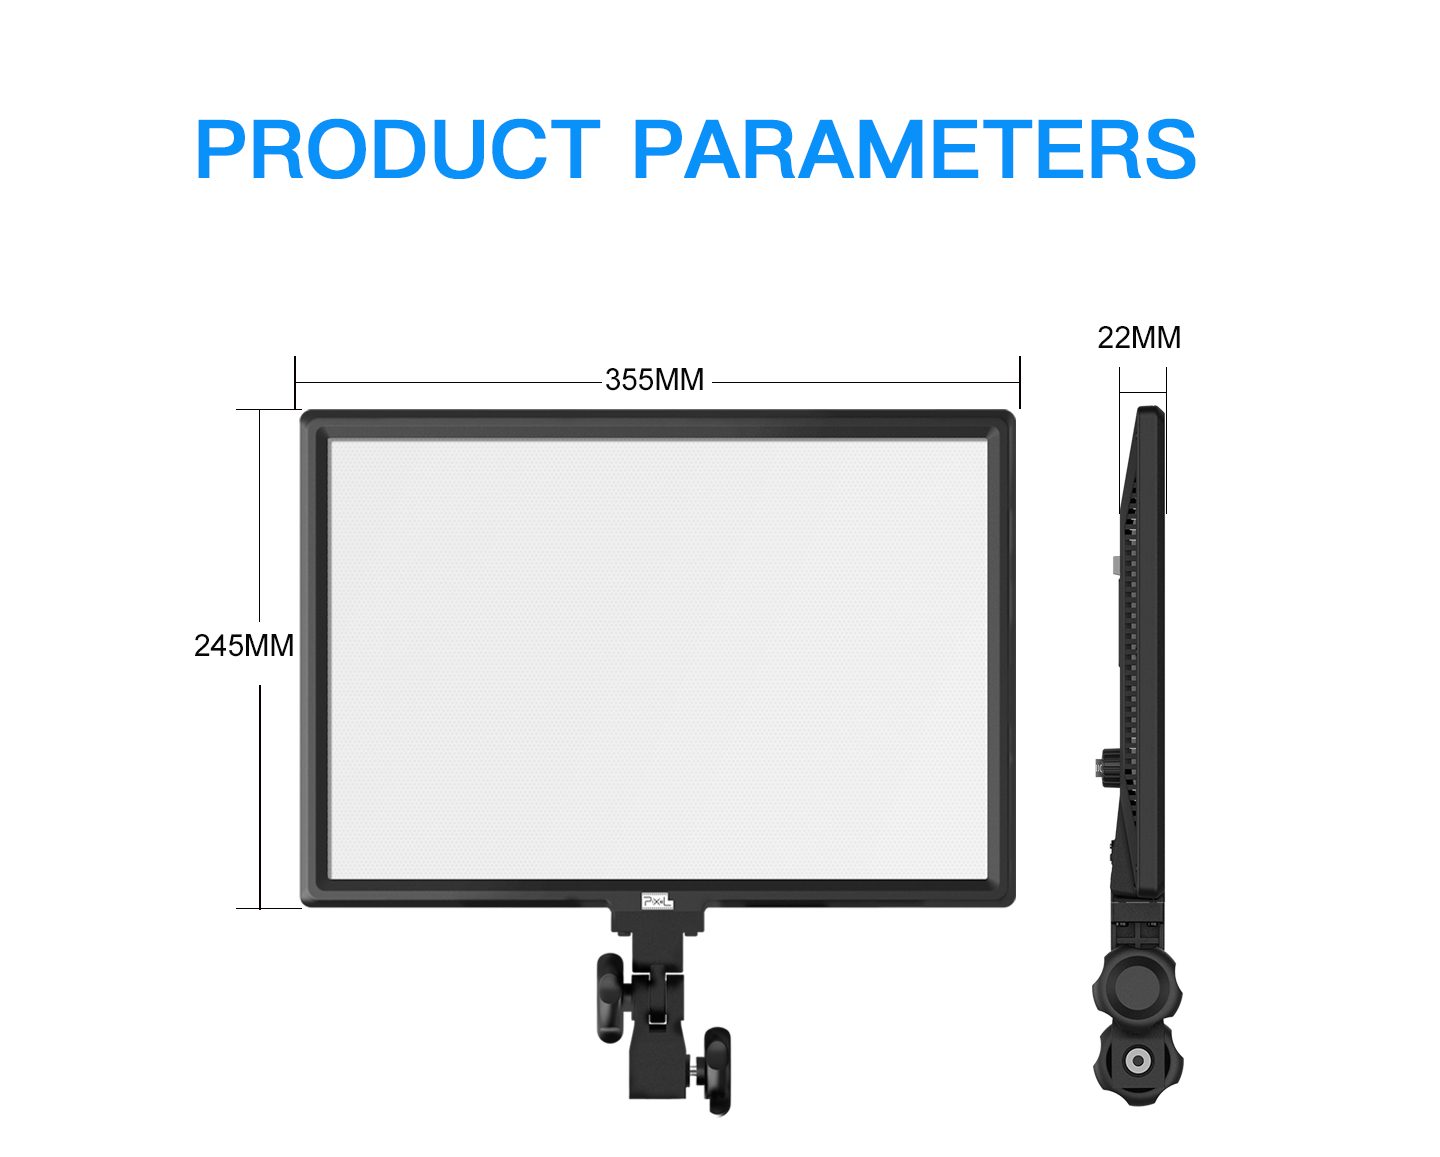 PRODUCT PARAMETERS